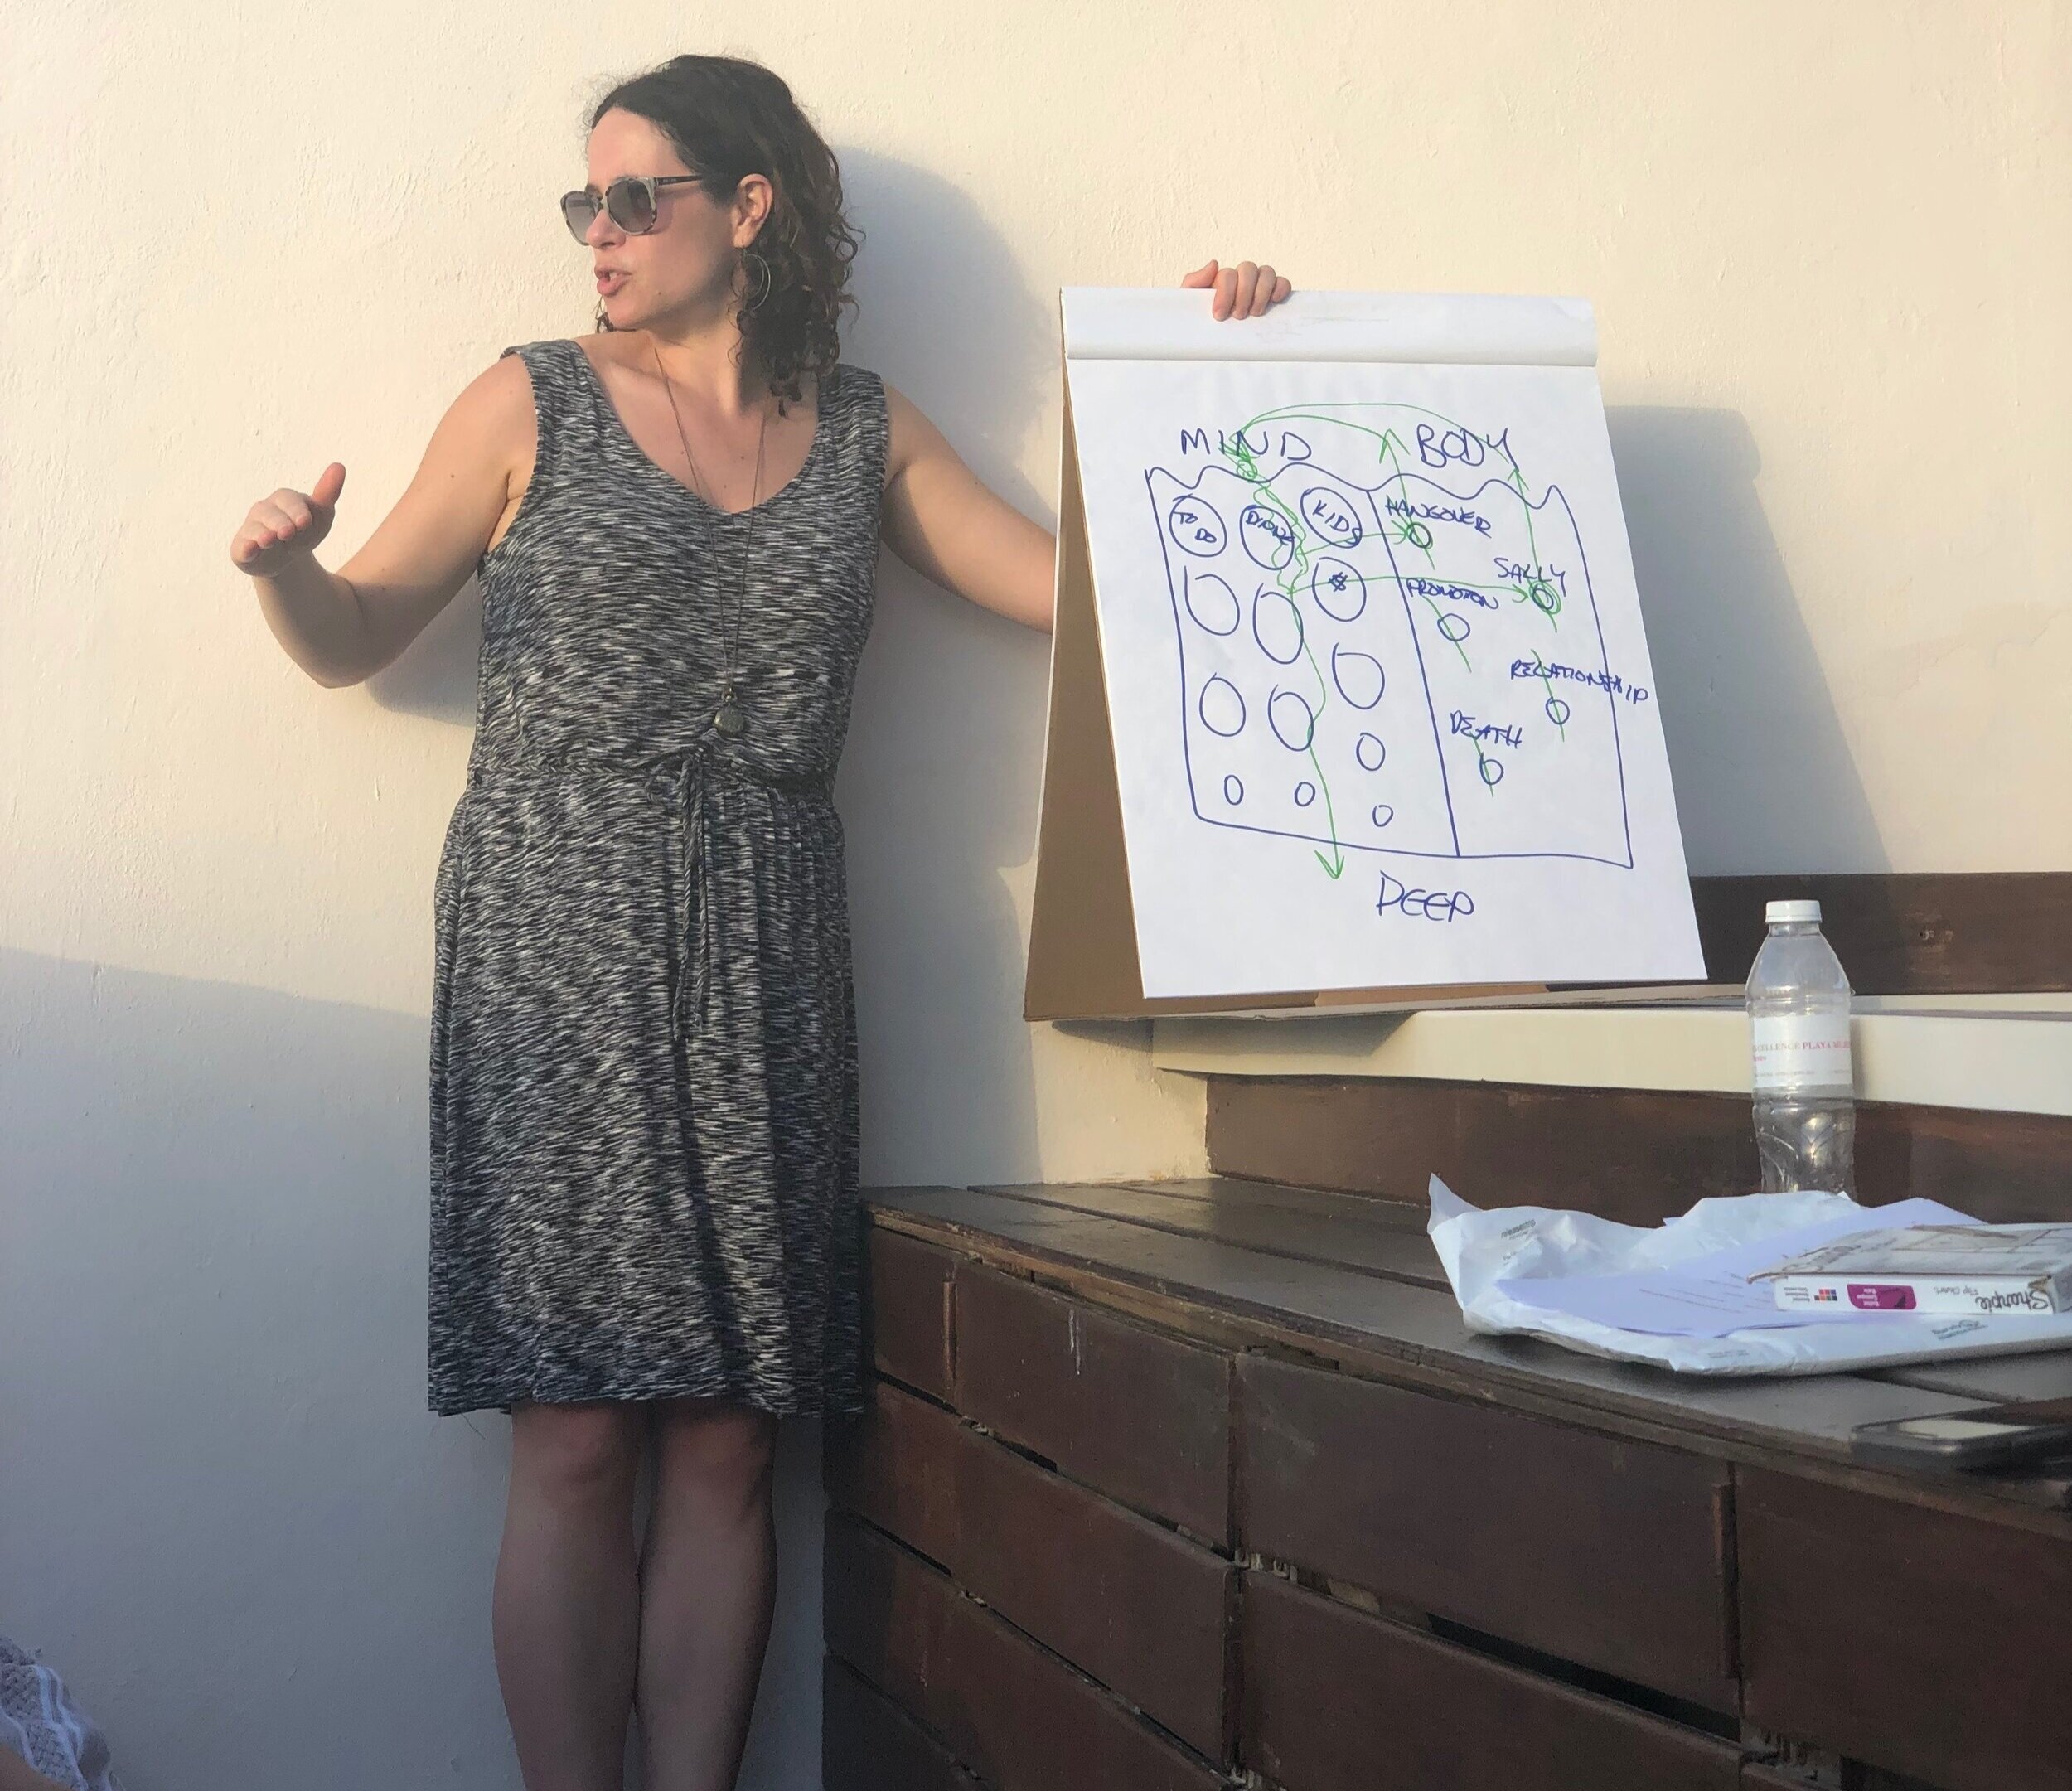 Dr. Jill Wener explains the mind-body connection using visuals on a presentation-size pad of paper.